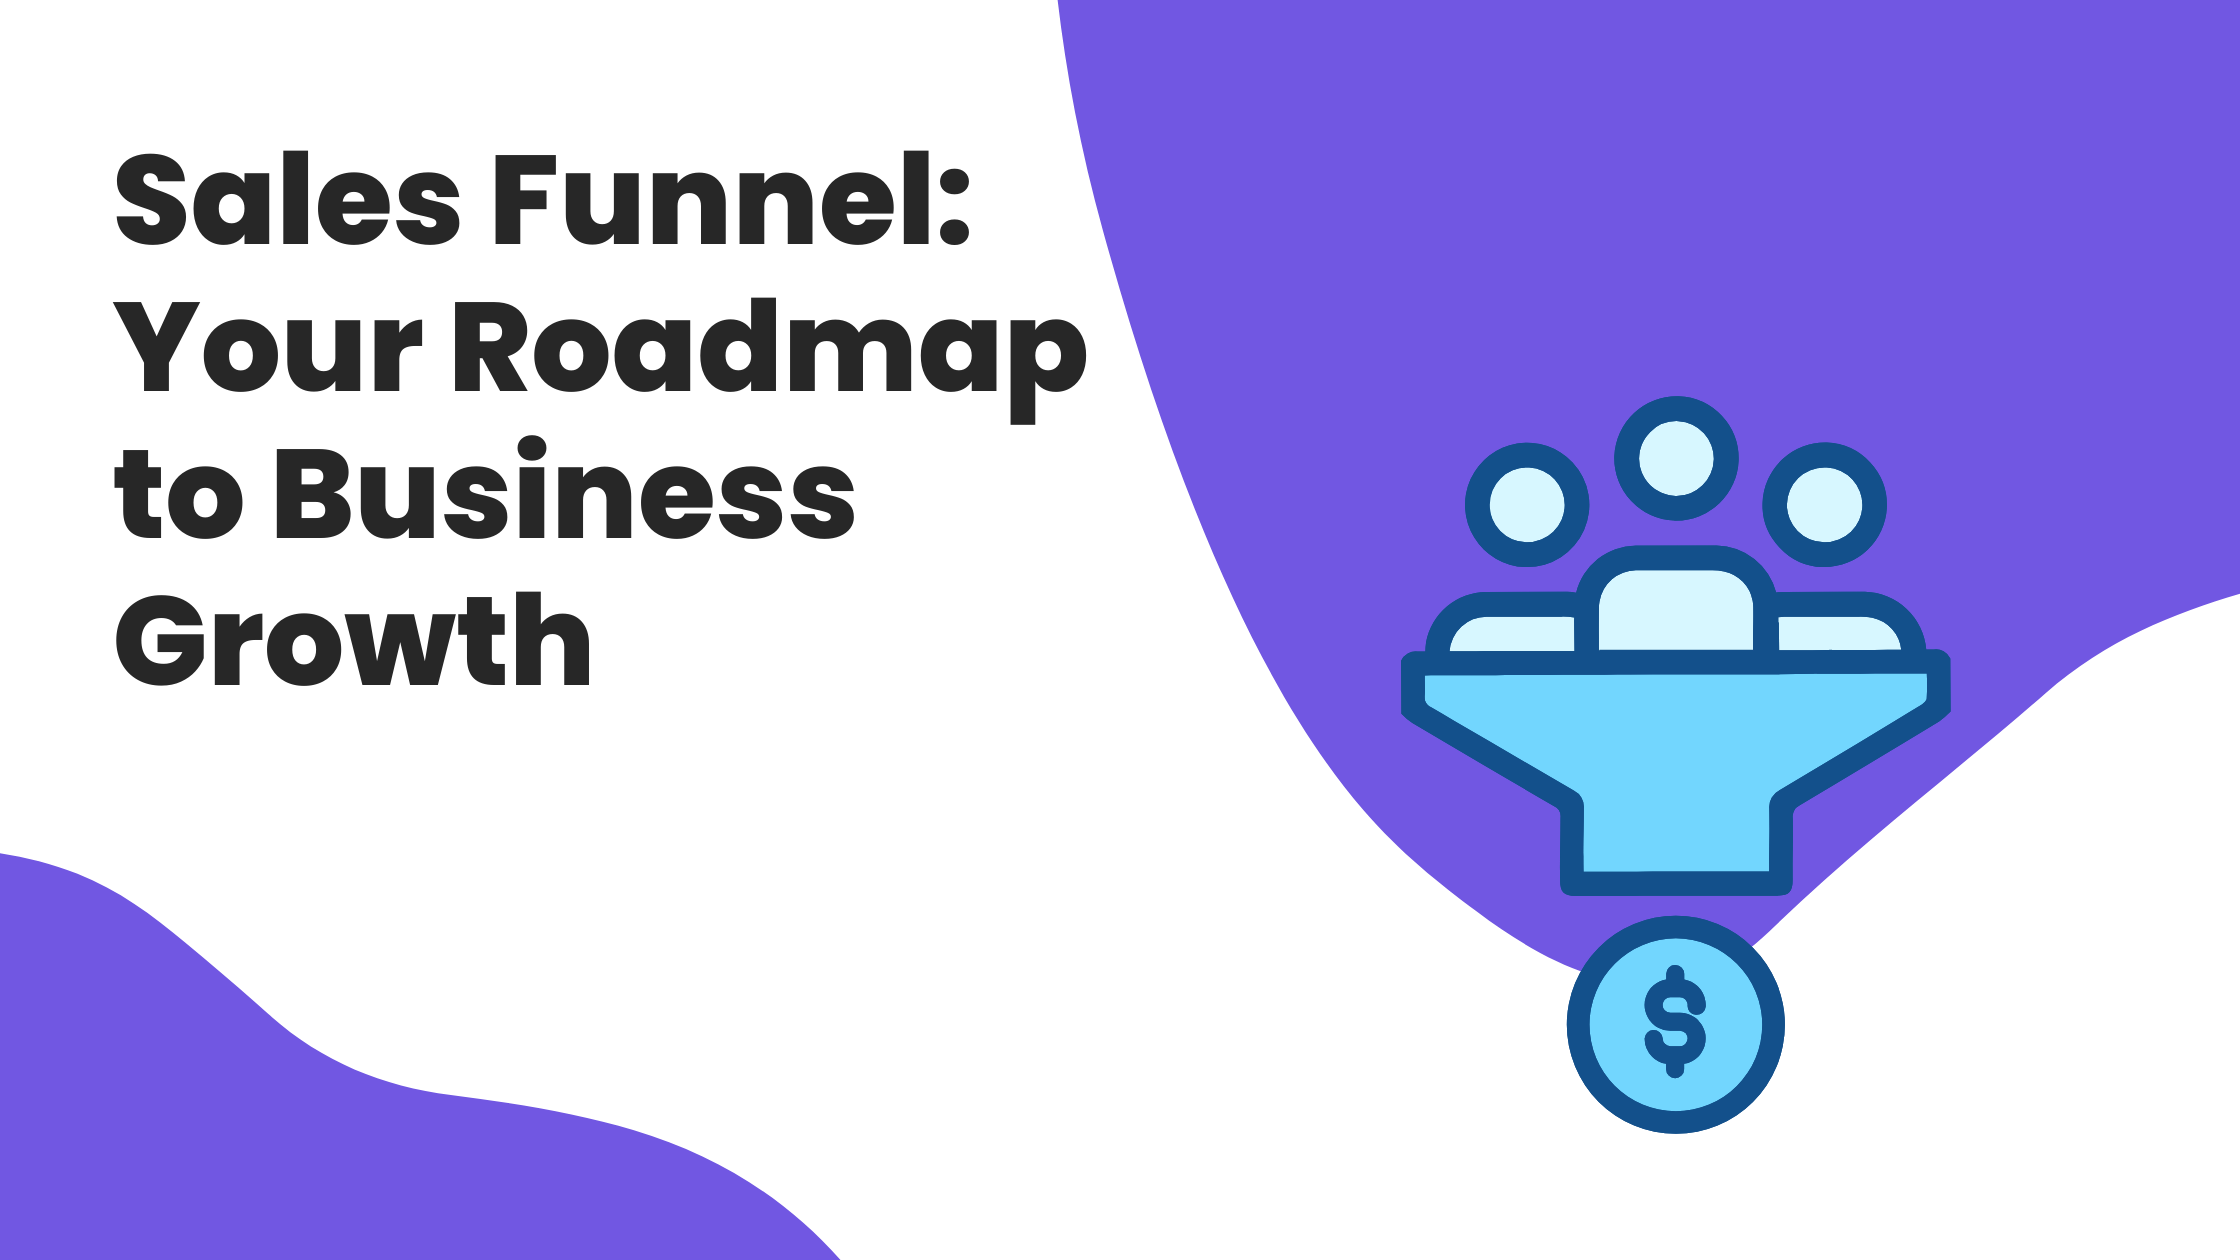 Sales Funnel: Your Roadmap to Business Growth